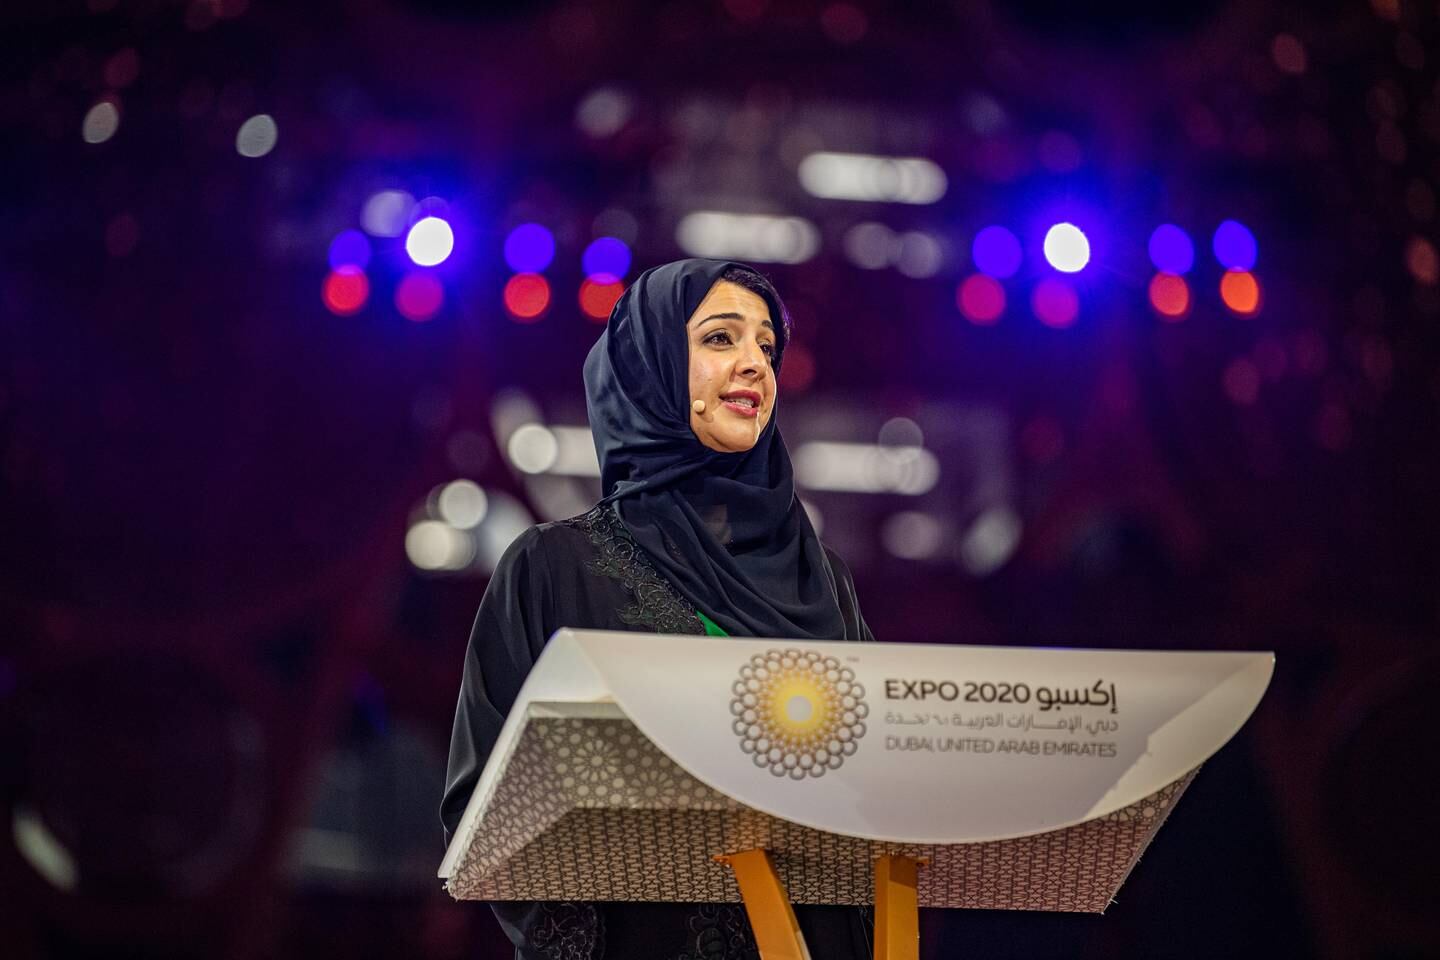 Reem Al Hashimy, UAE Minister of State for International Co-operation and director general of Expo 2020 Dubai, during the inauguration of the Women's Pavilion inauguration at Al Wasl, Expo 2020 Dubai. Photo: Expo 2020 Dubai